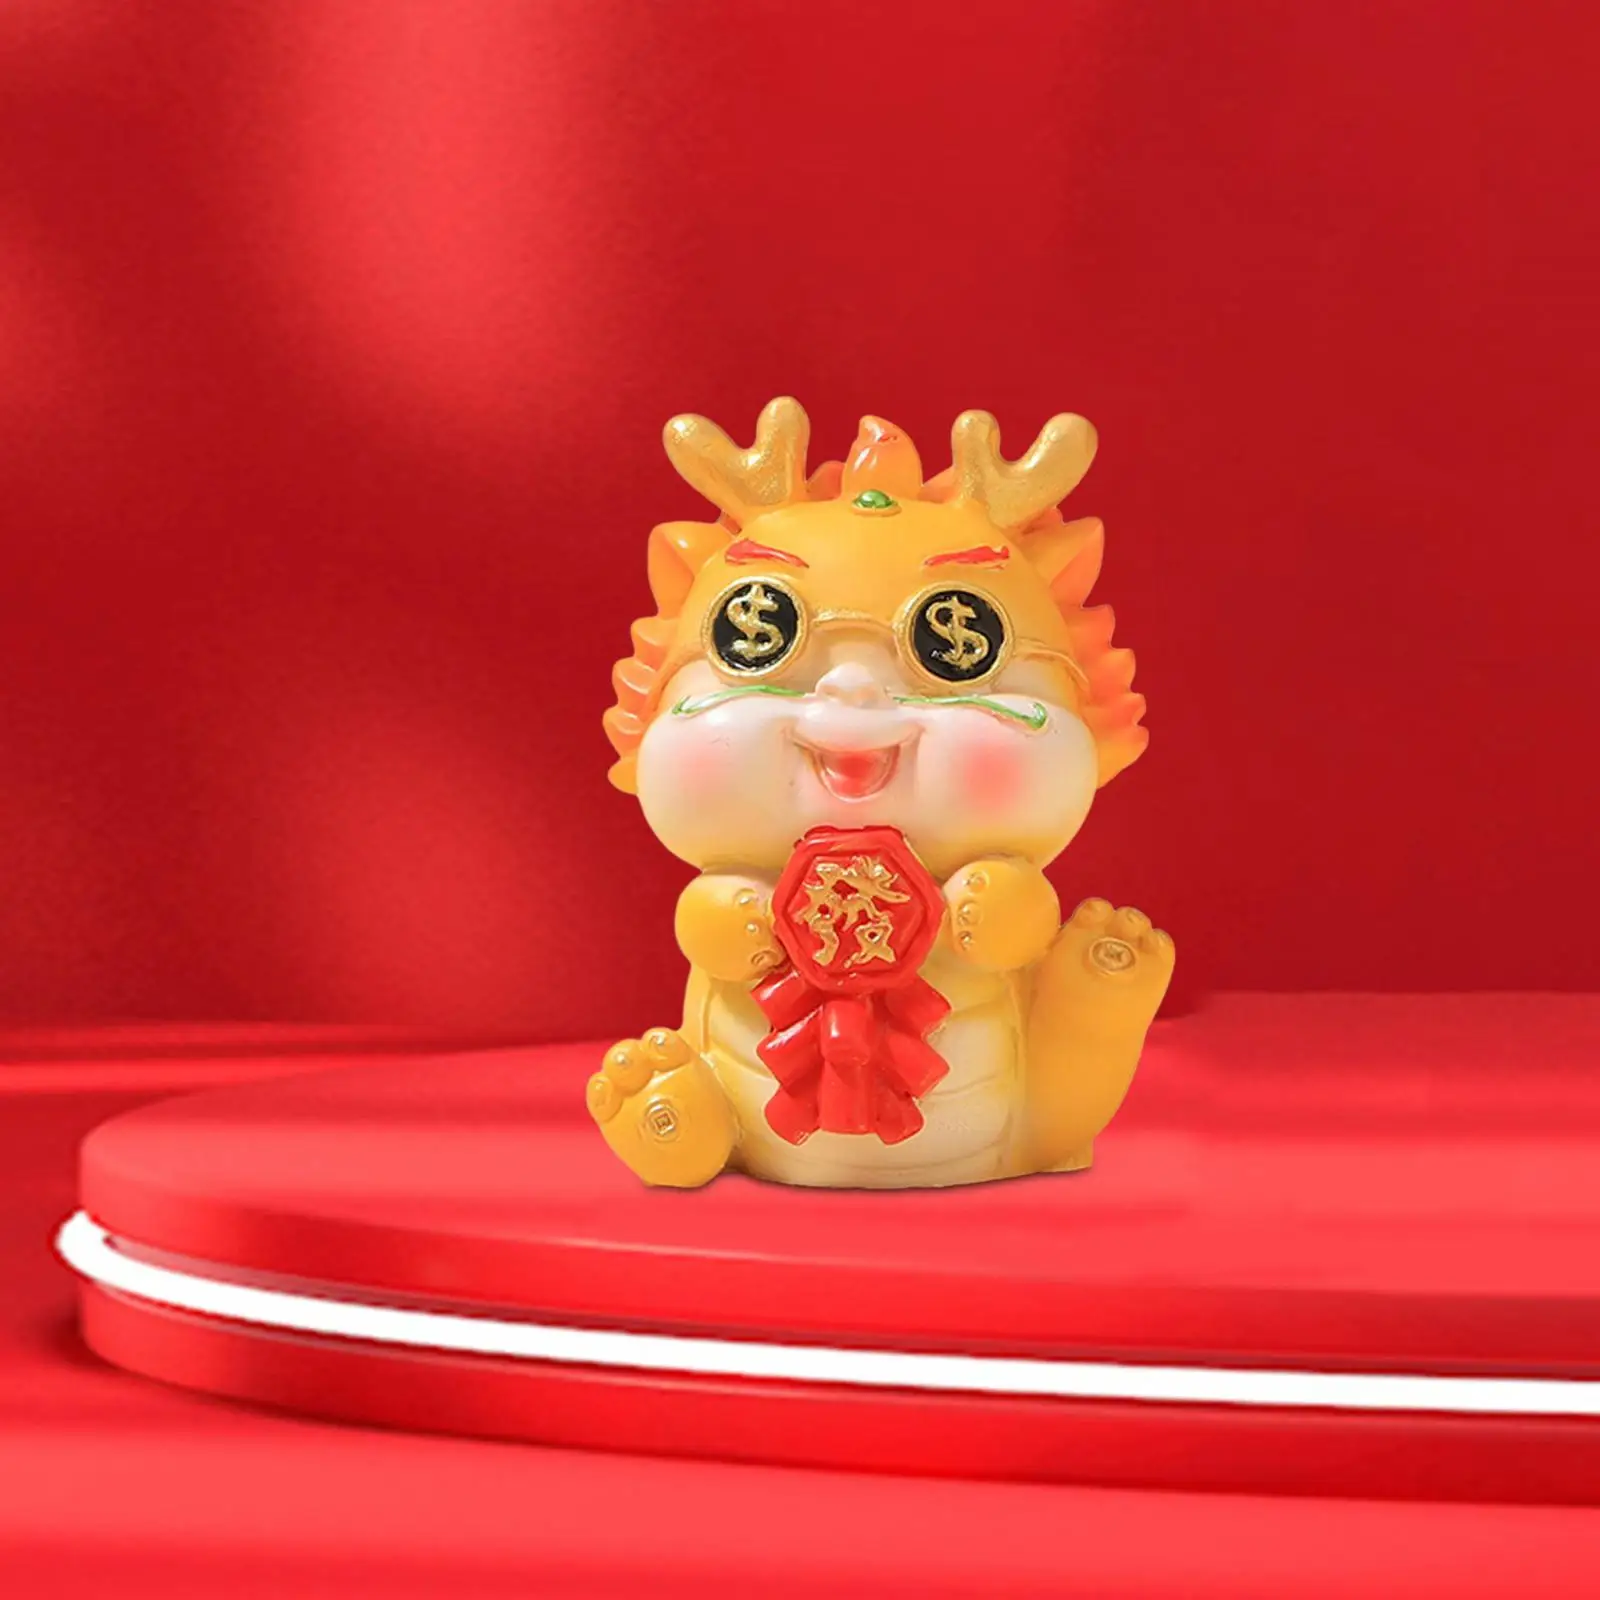 Resin Chinese Dragon Statue Cute Ornament Table Centerpiece Chinese Animals Statue for Cabinet Home Bedroom Bookshelf Decoration